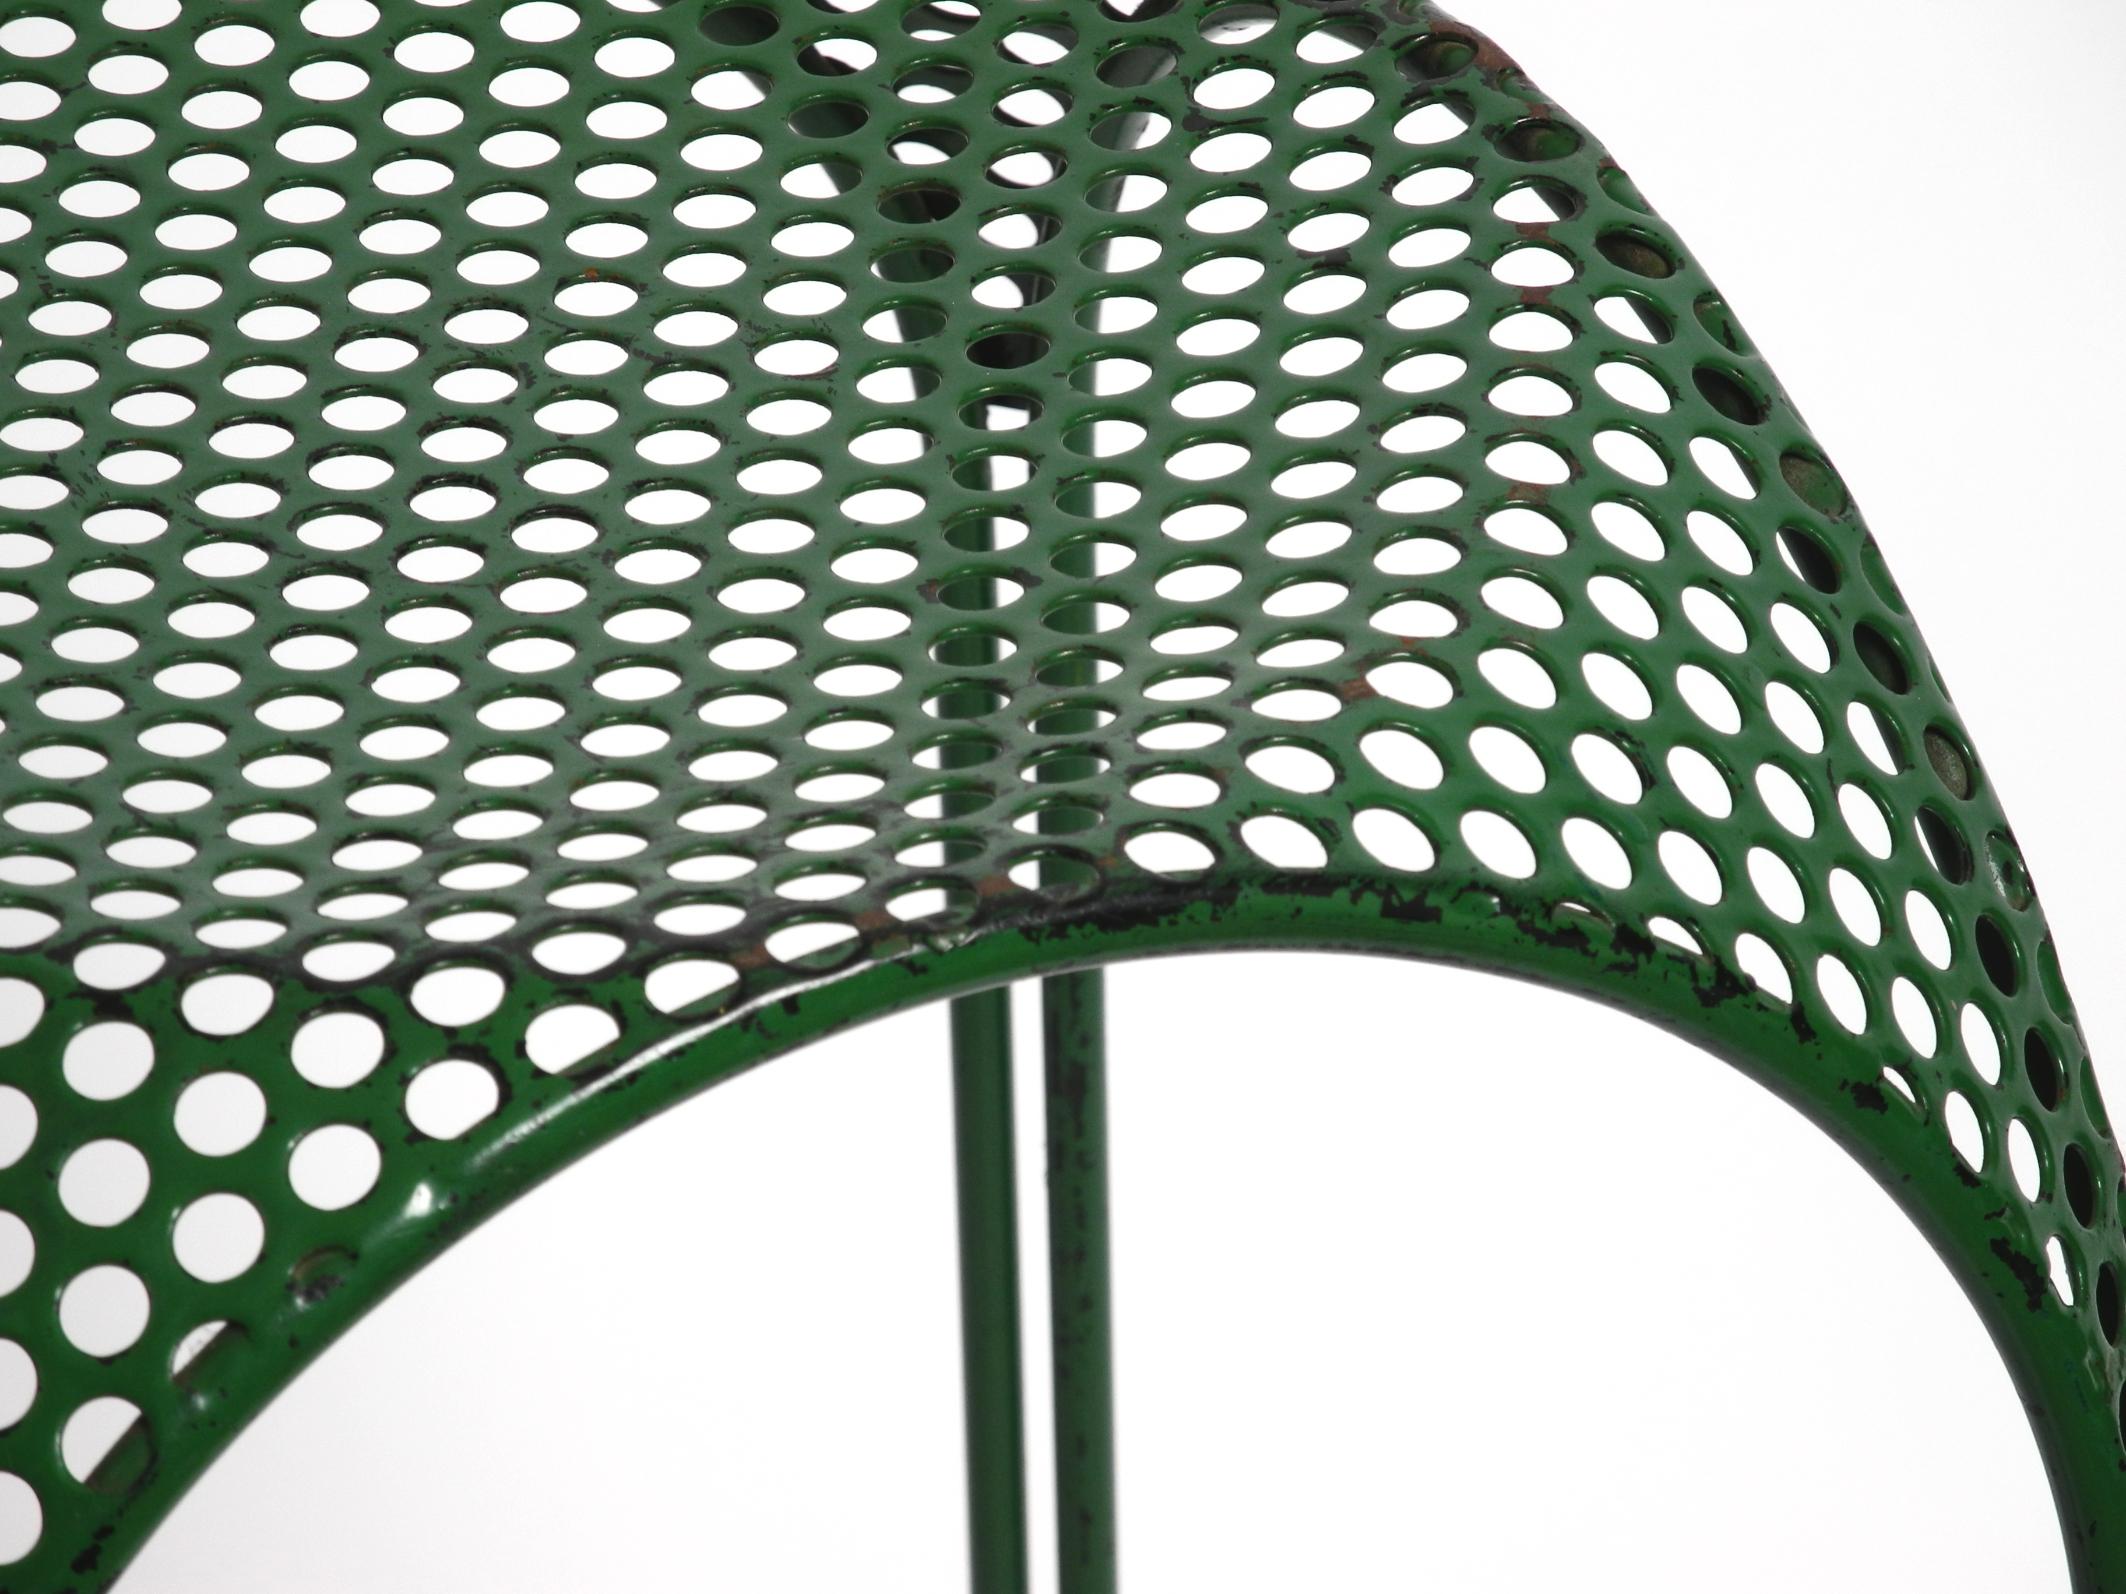 Italian 1960s bar stool made of green painted metal with perforated metal seat For Sale 10